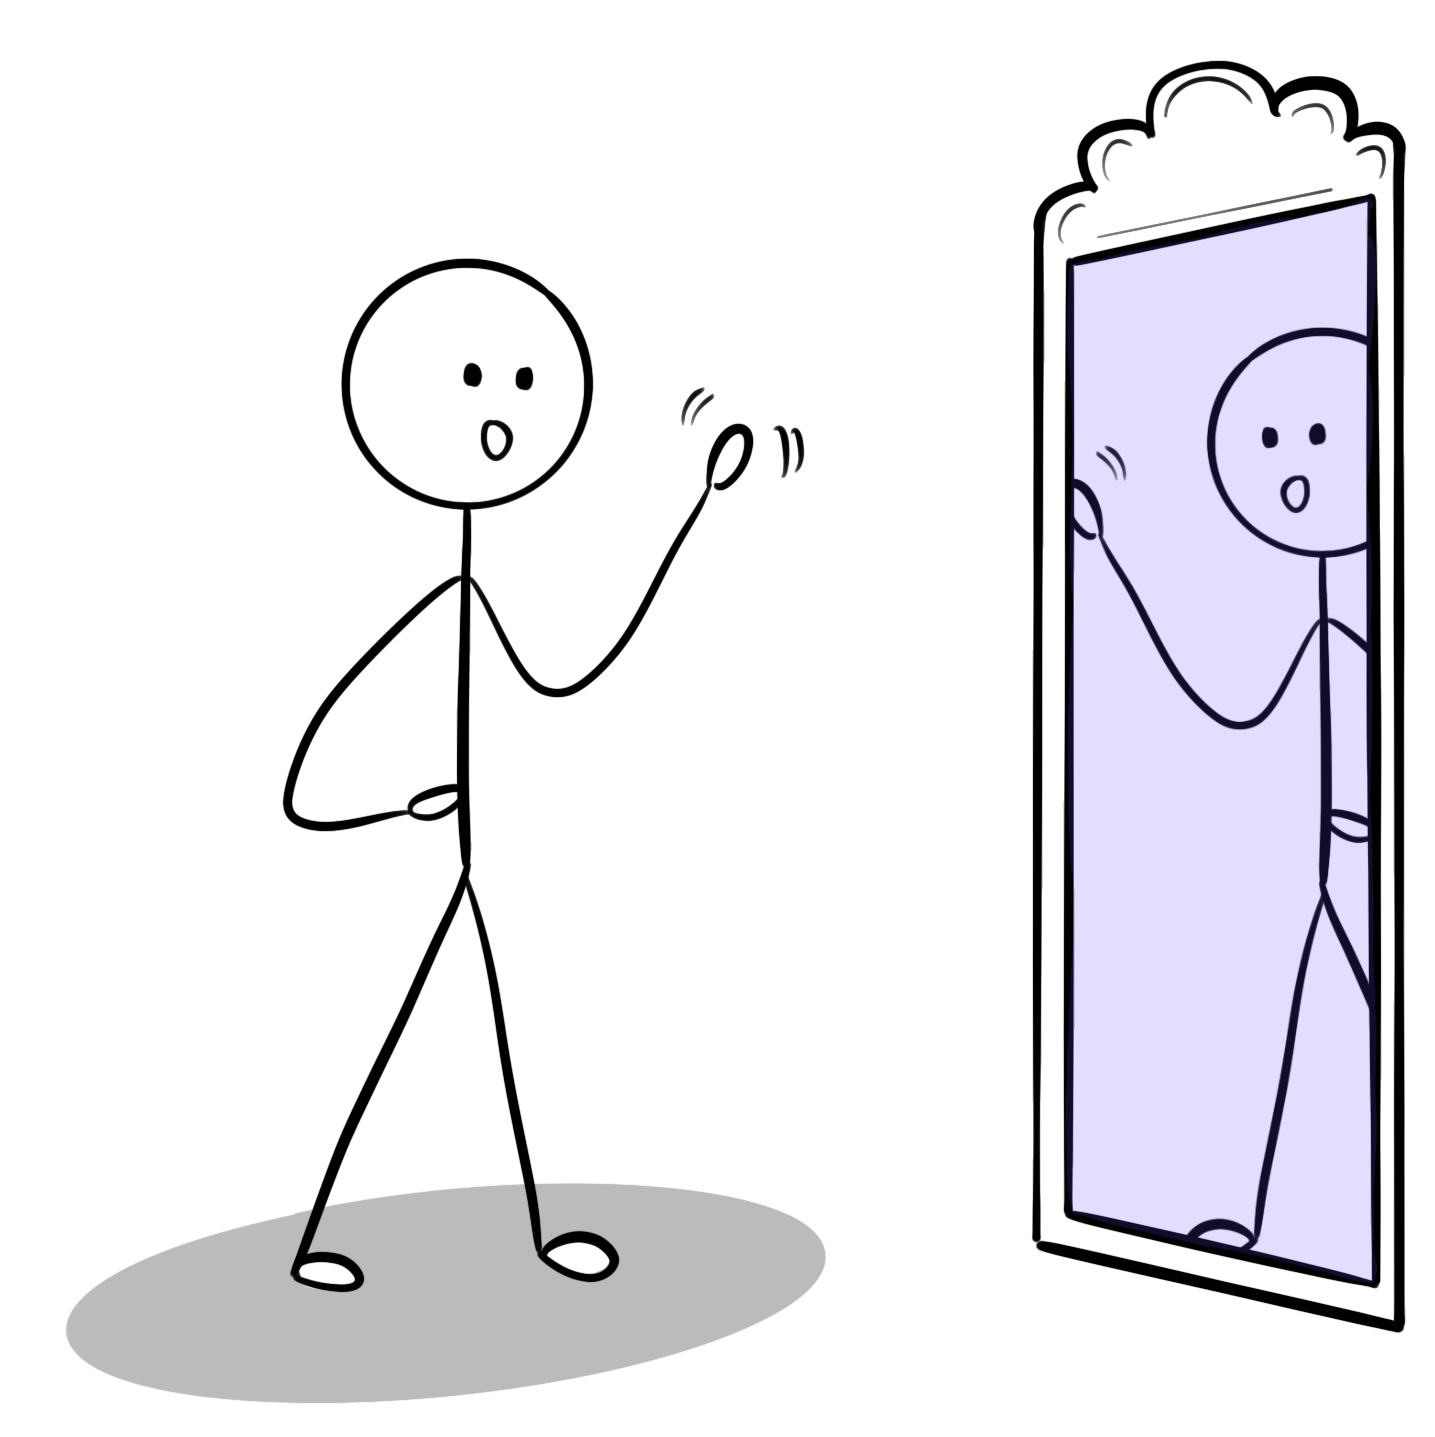 a character is looking at themselves in the mirror, waving at their body